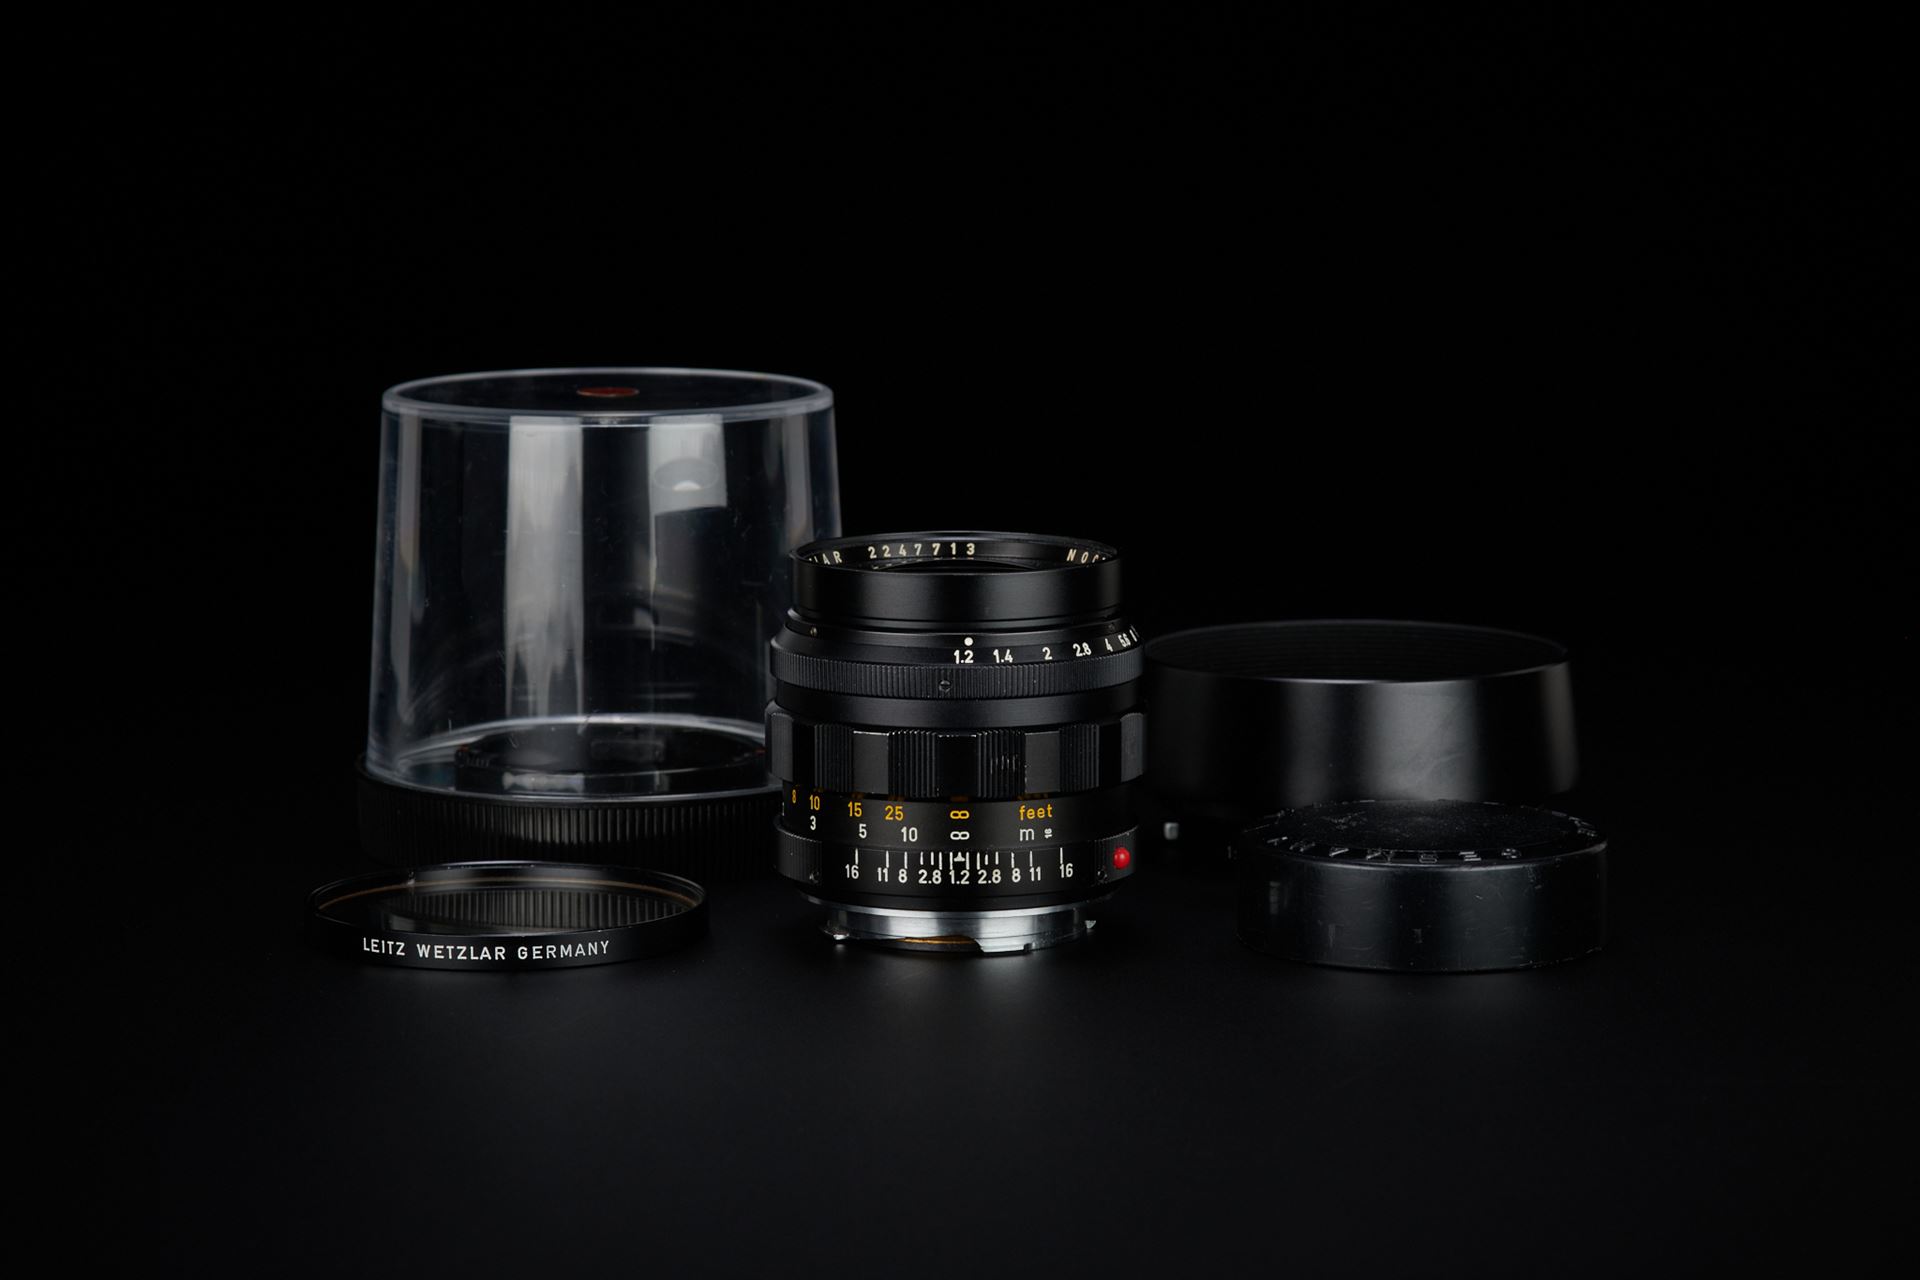 Picture of Leica Noctilux 50mm f/1.2